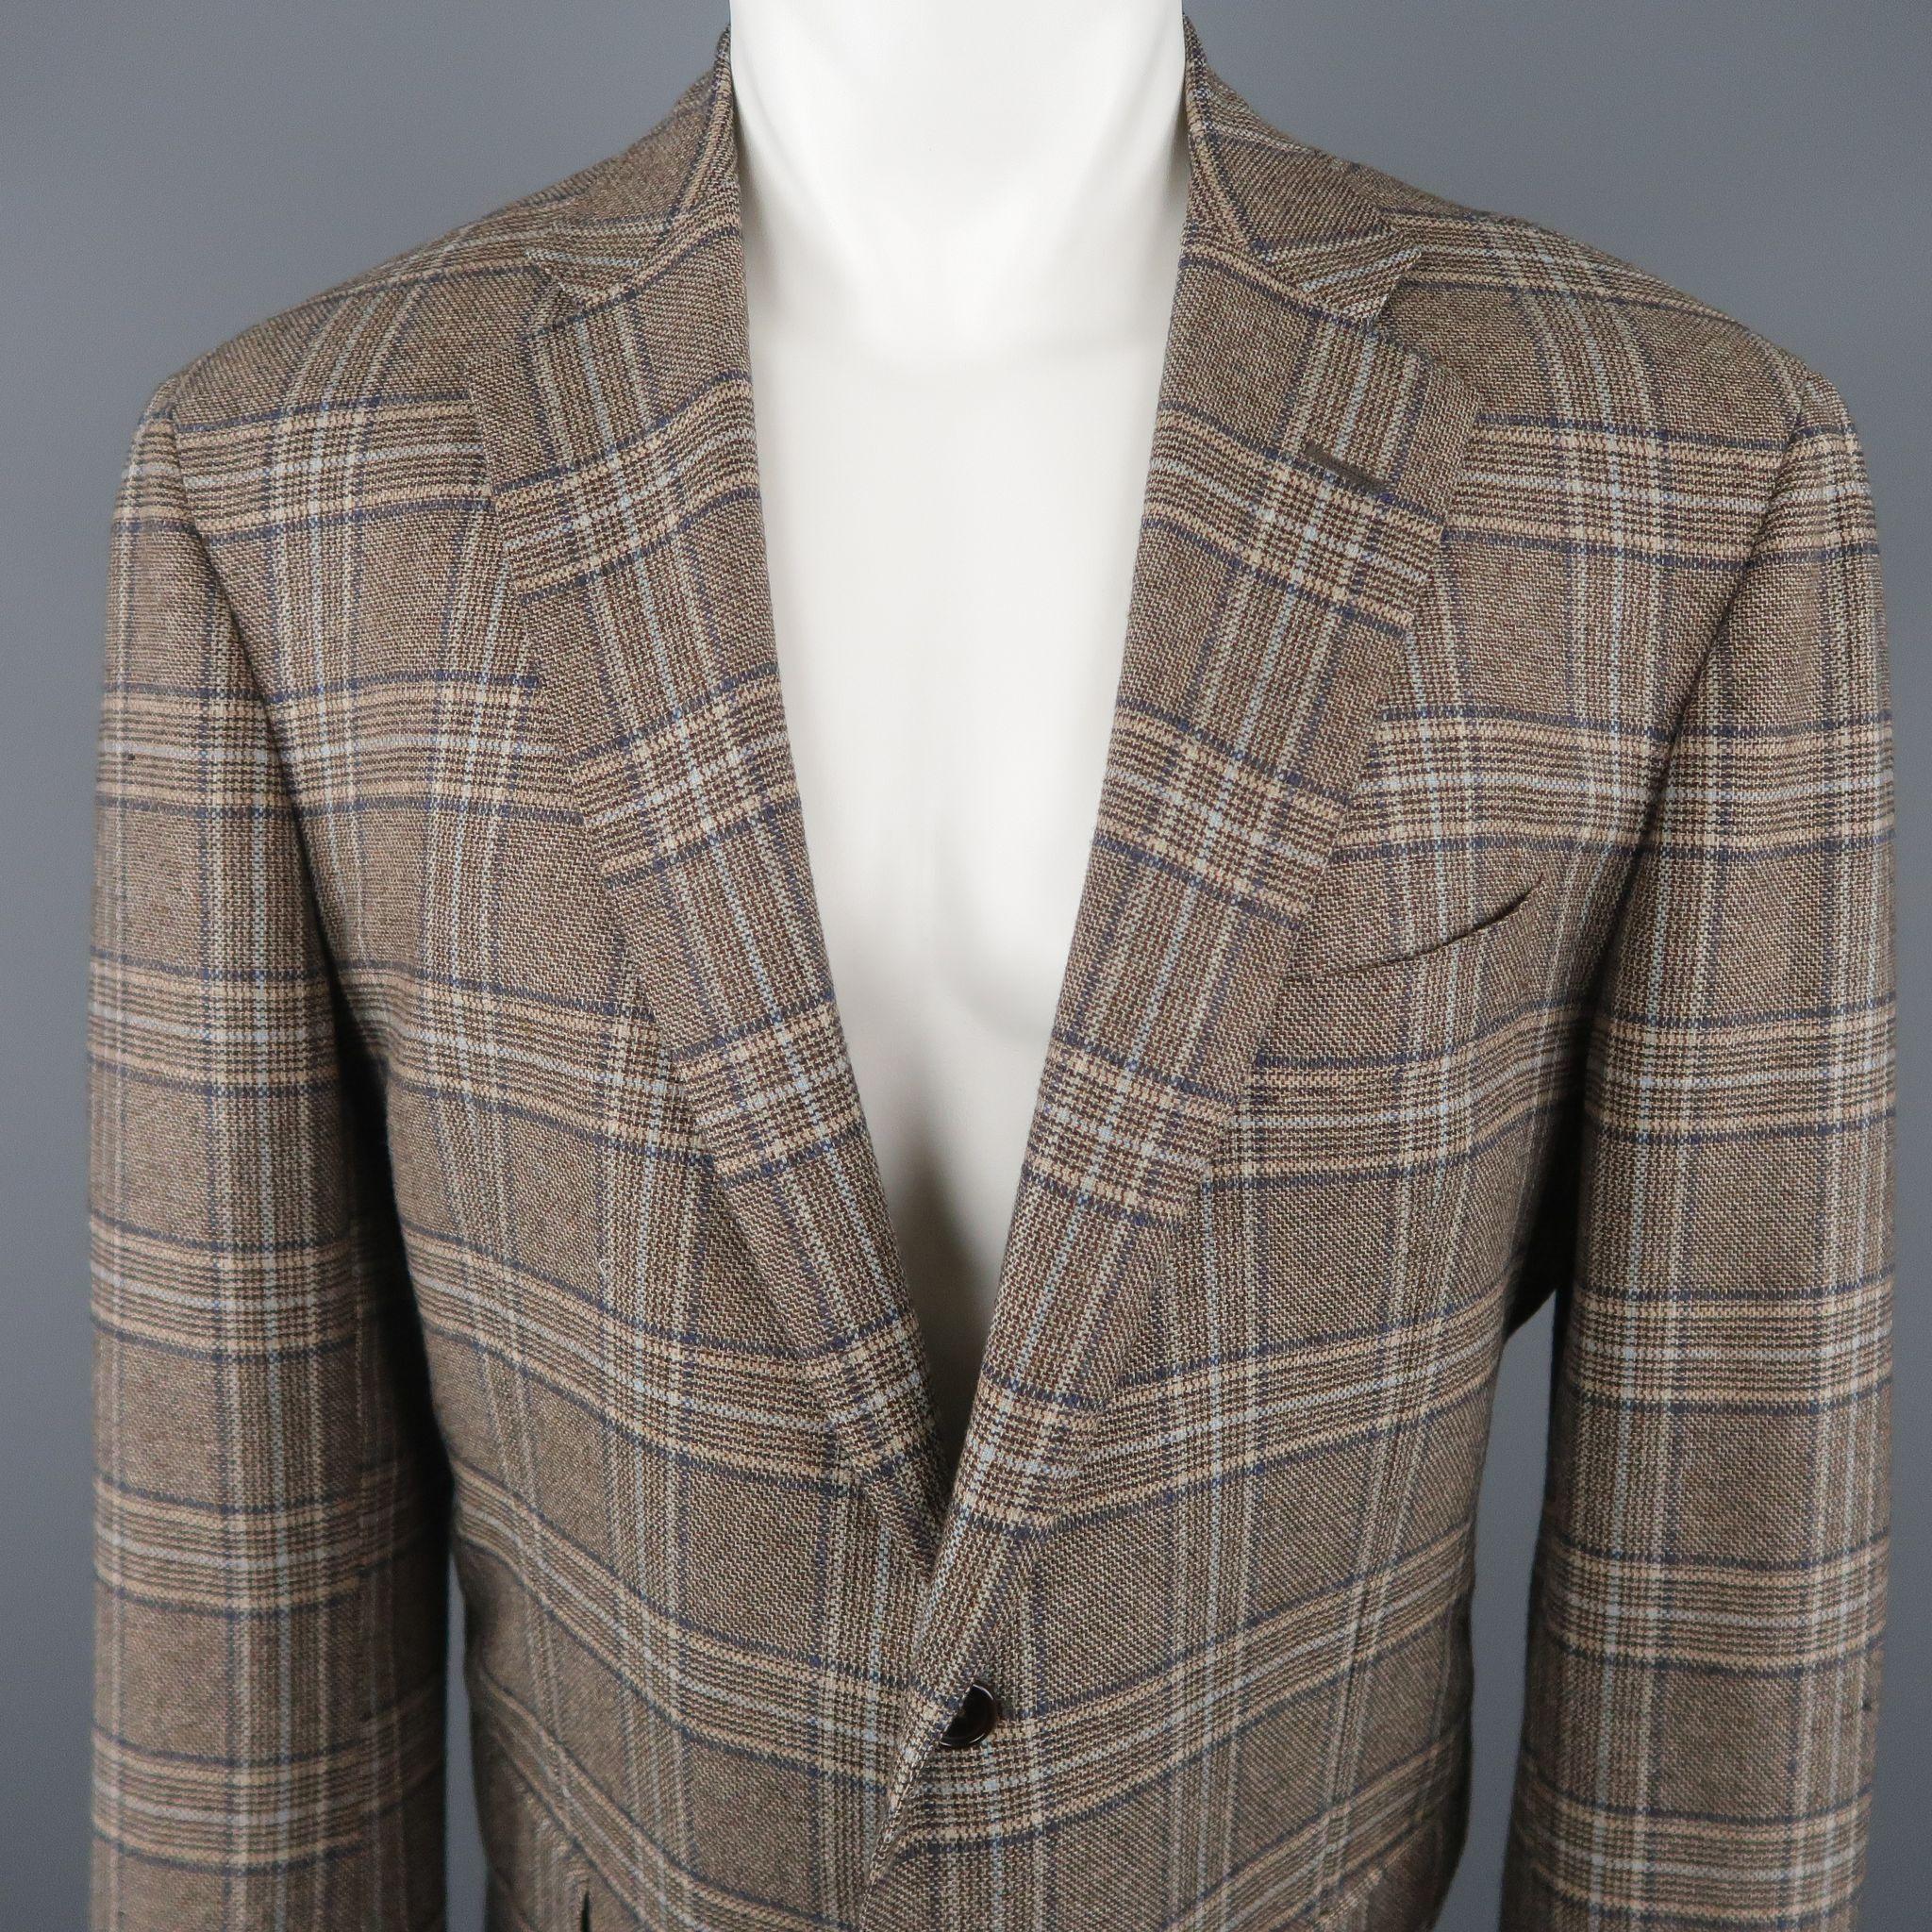 BARNEY'S NEW YORK sport coat comes in taupe plaid cashmere with a notch lapel, two button, single breasted front, and flap pockets. Made in Italy
 
Excellent Pre-Owned Condition.
Marked: IT 54
 
Measurements:
 
Shoulder: 19 in.
Chest: 44 in.
Sleeve: